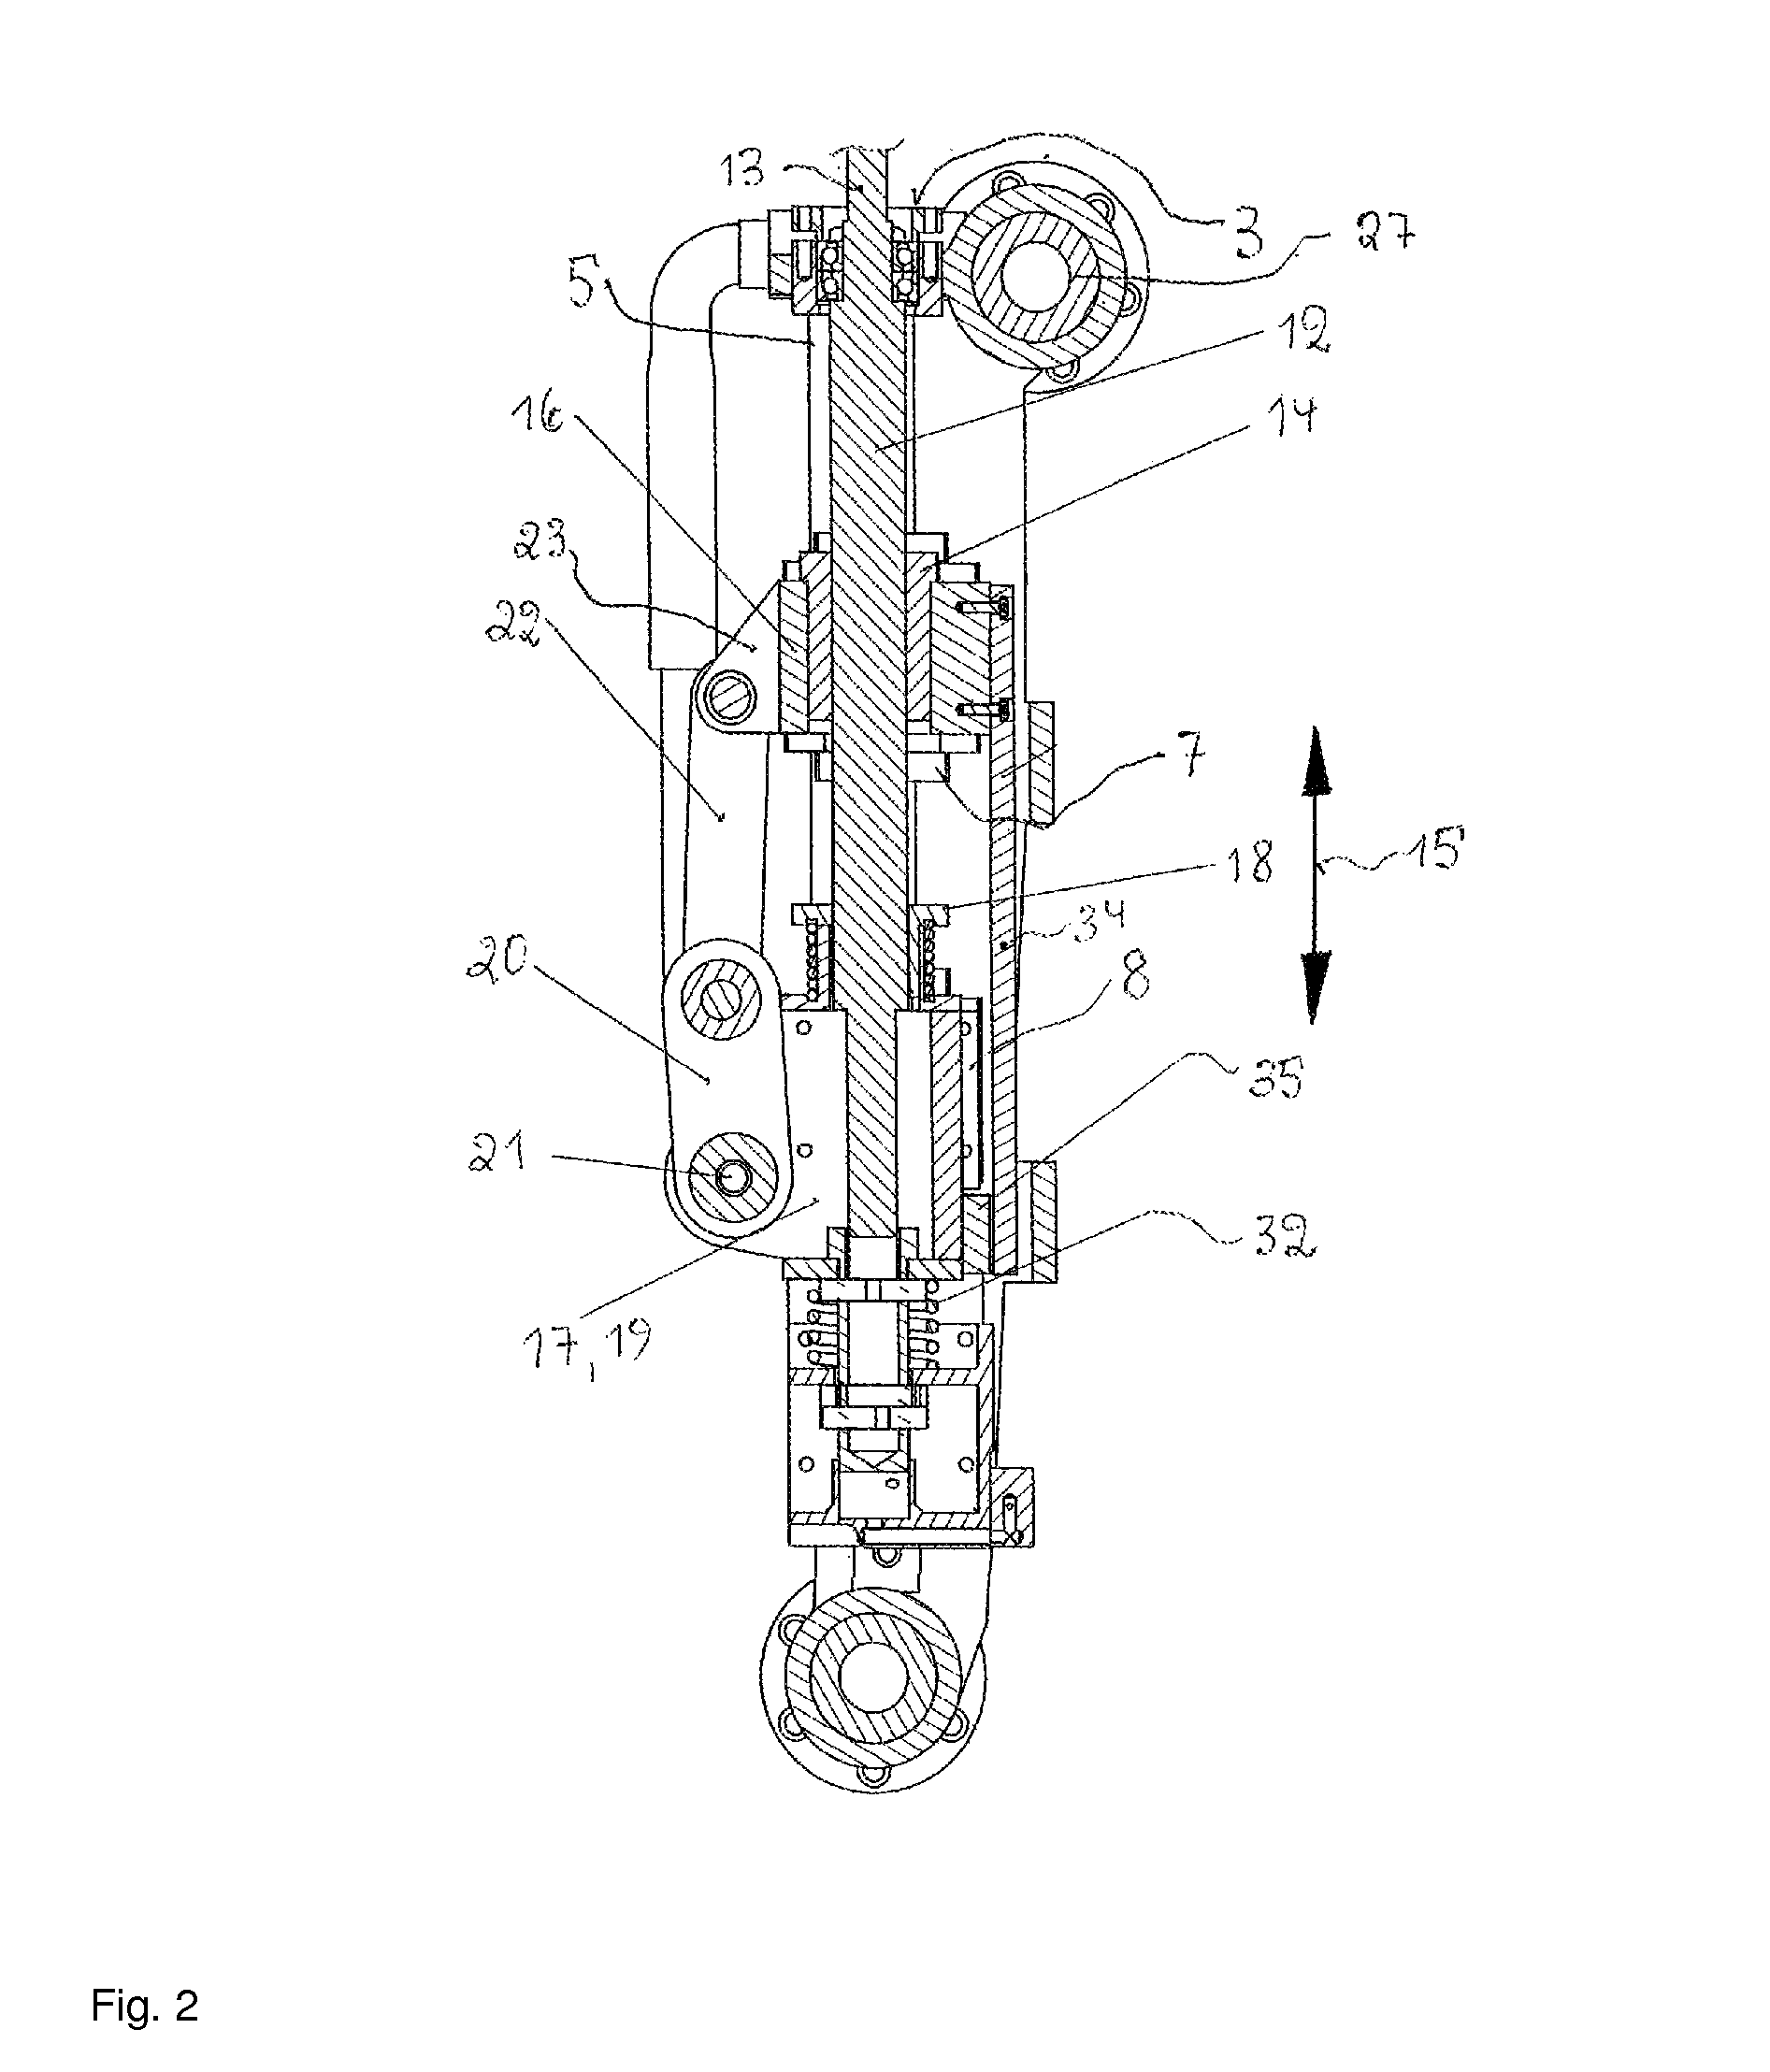 Module for transferring a component between two positions